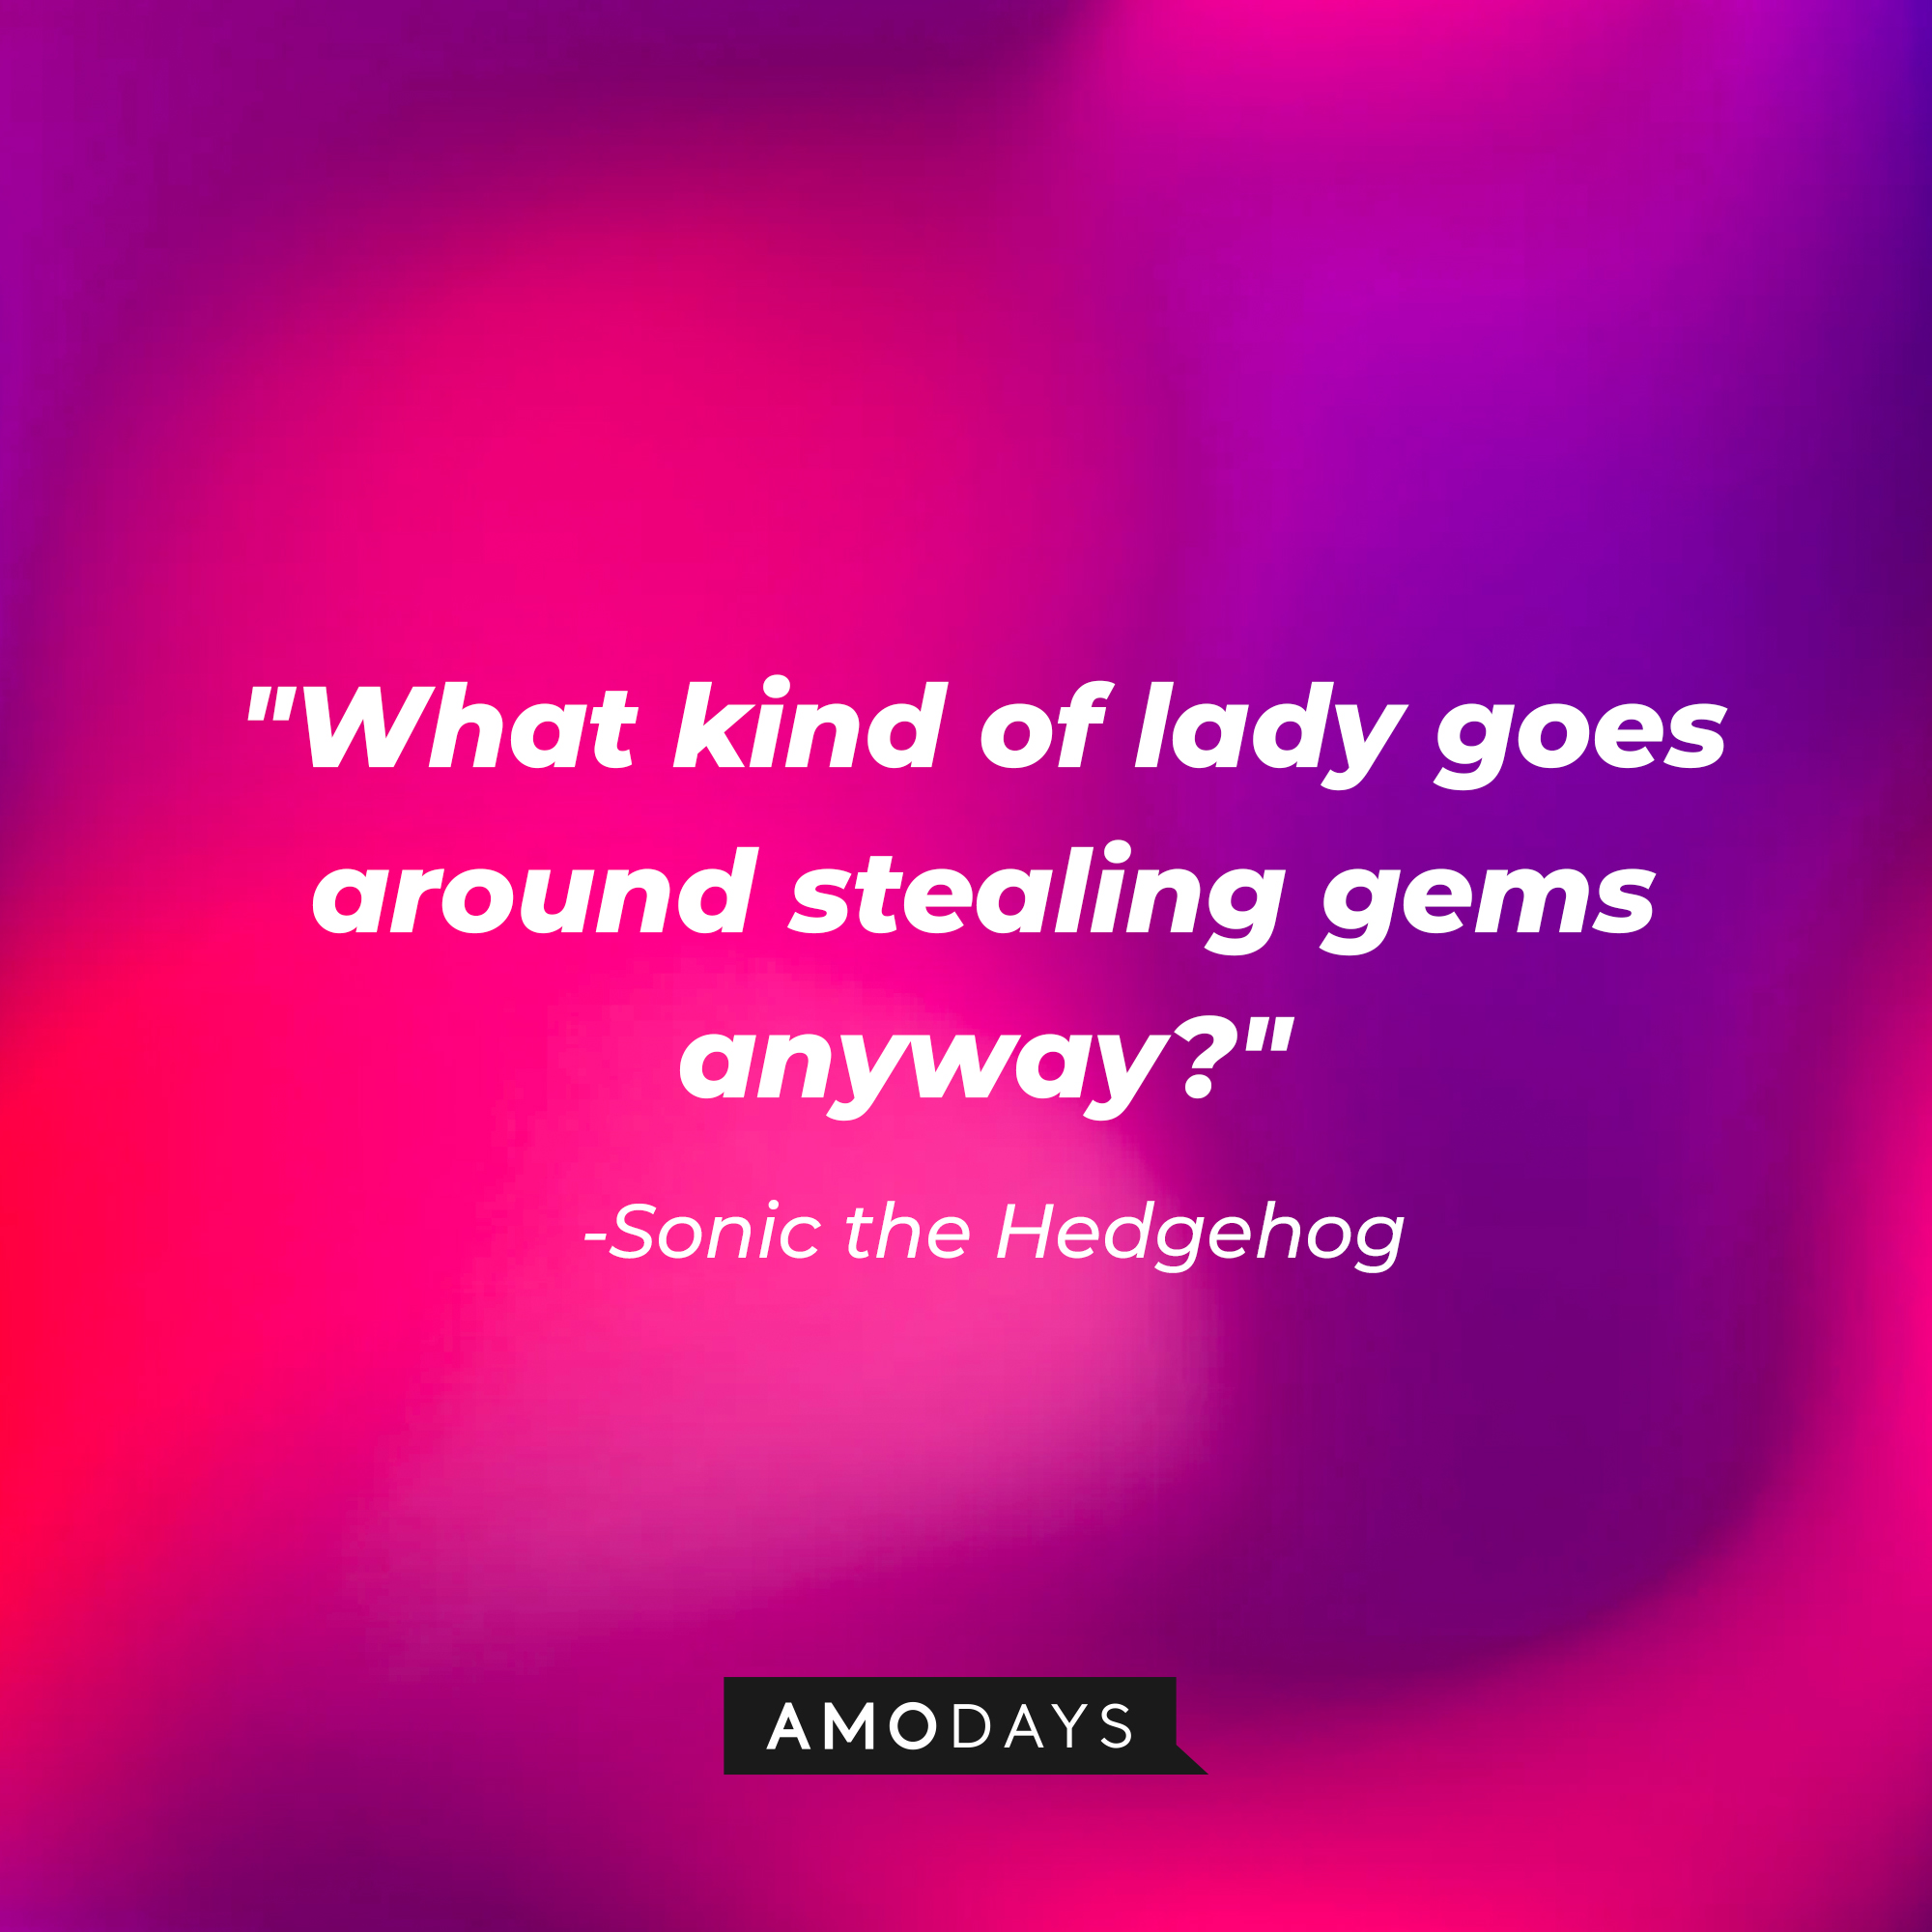 Sonic's quote: "What kind of lady goes around stealing gems anyway?" | Source: Amodays